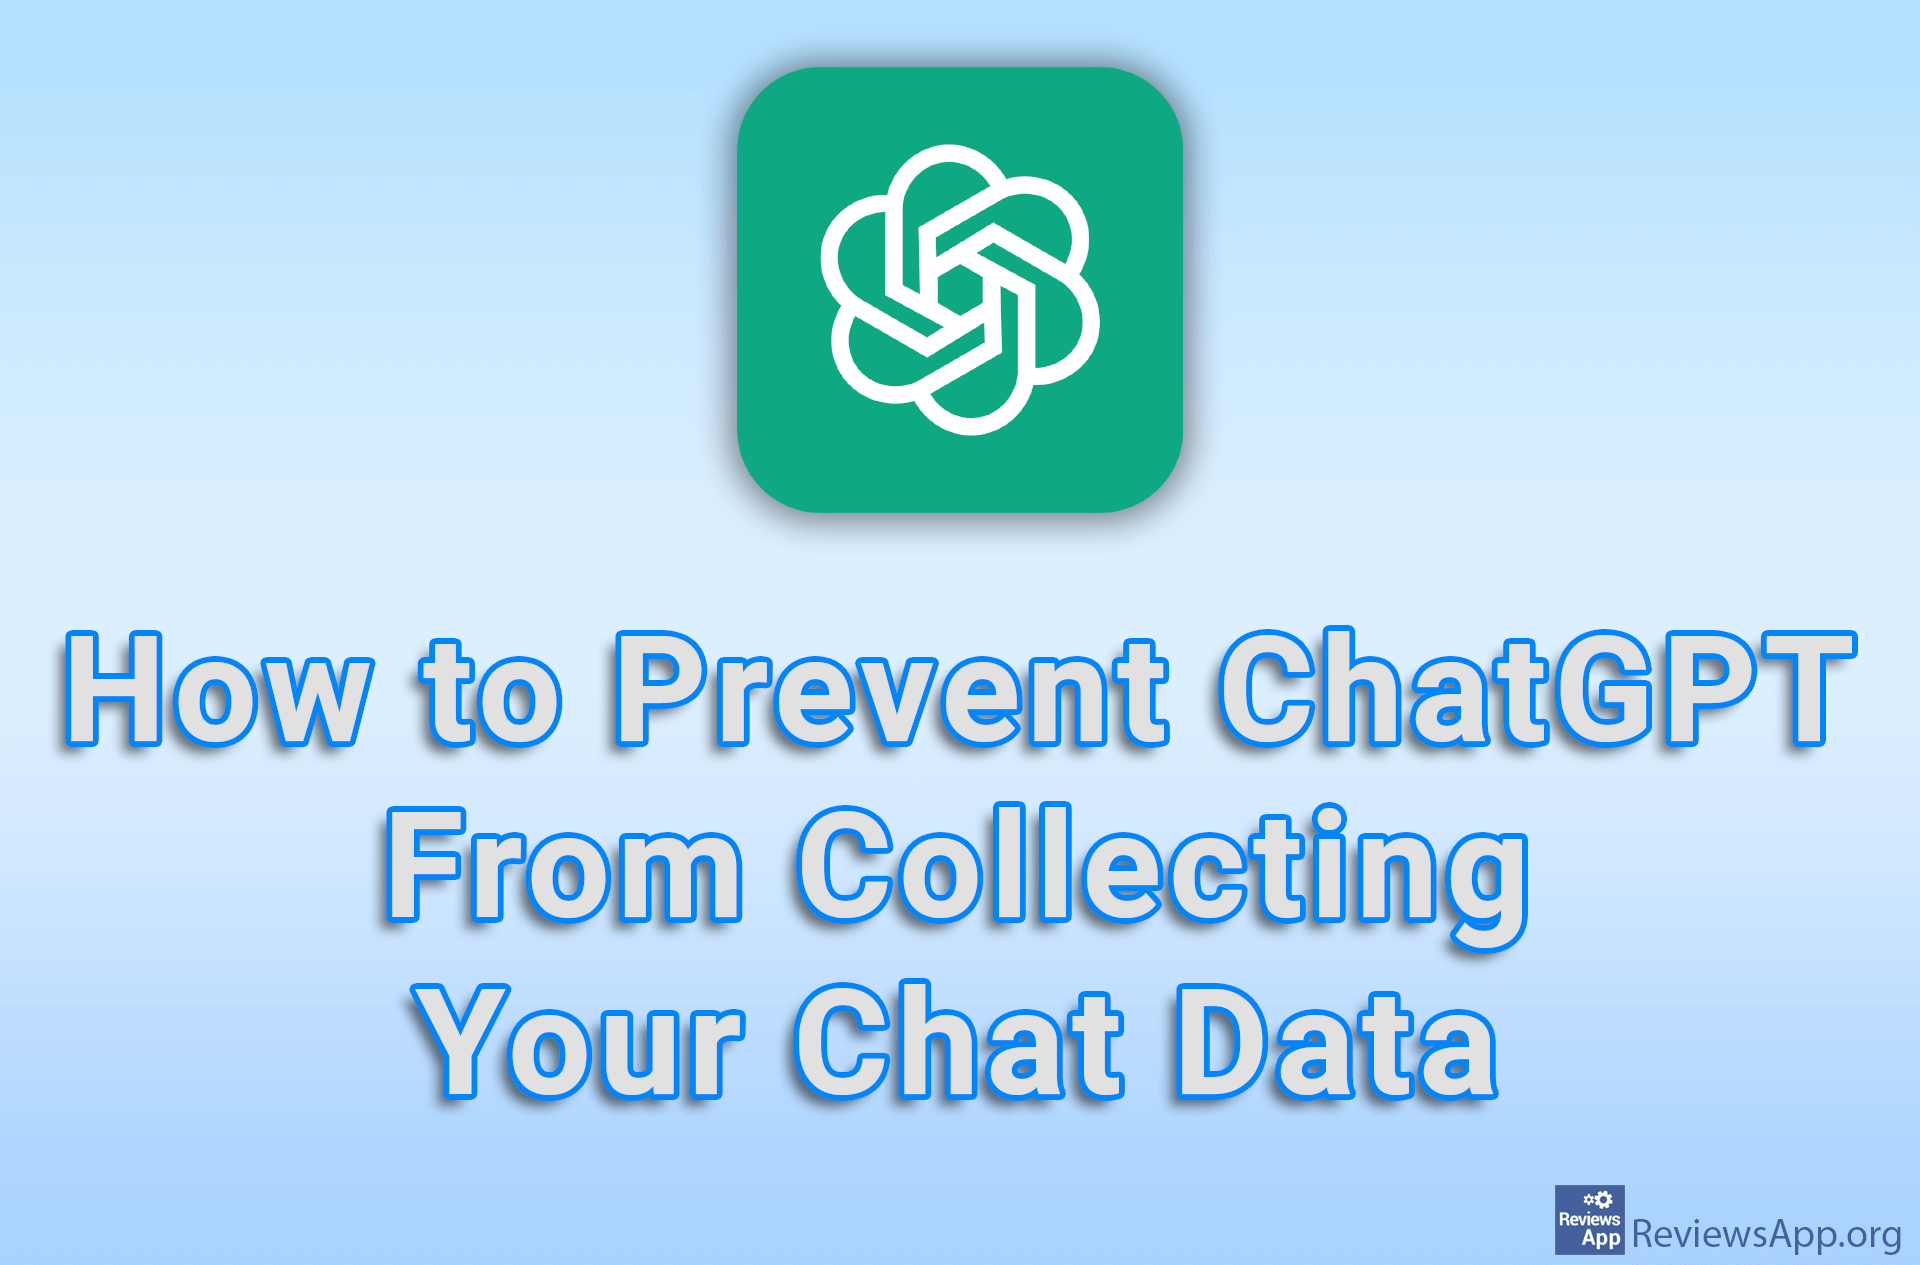 How to Prevent ChatGPT From Collecting Your Chat Data